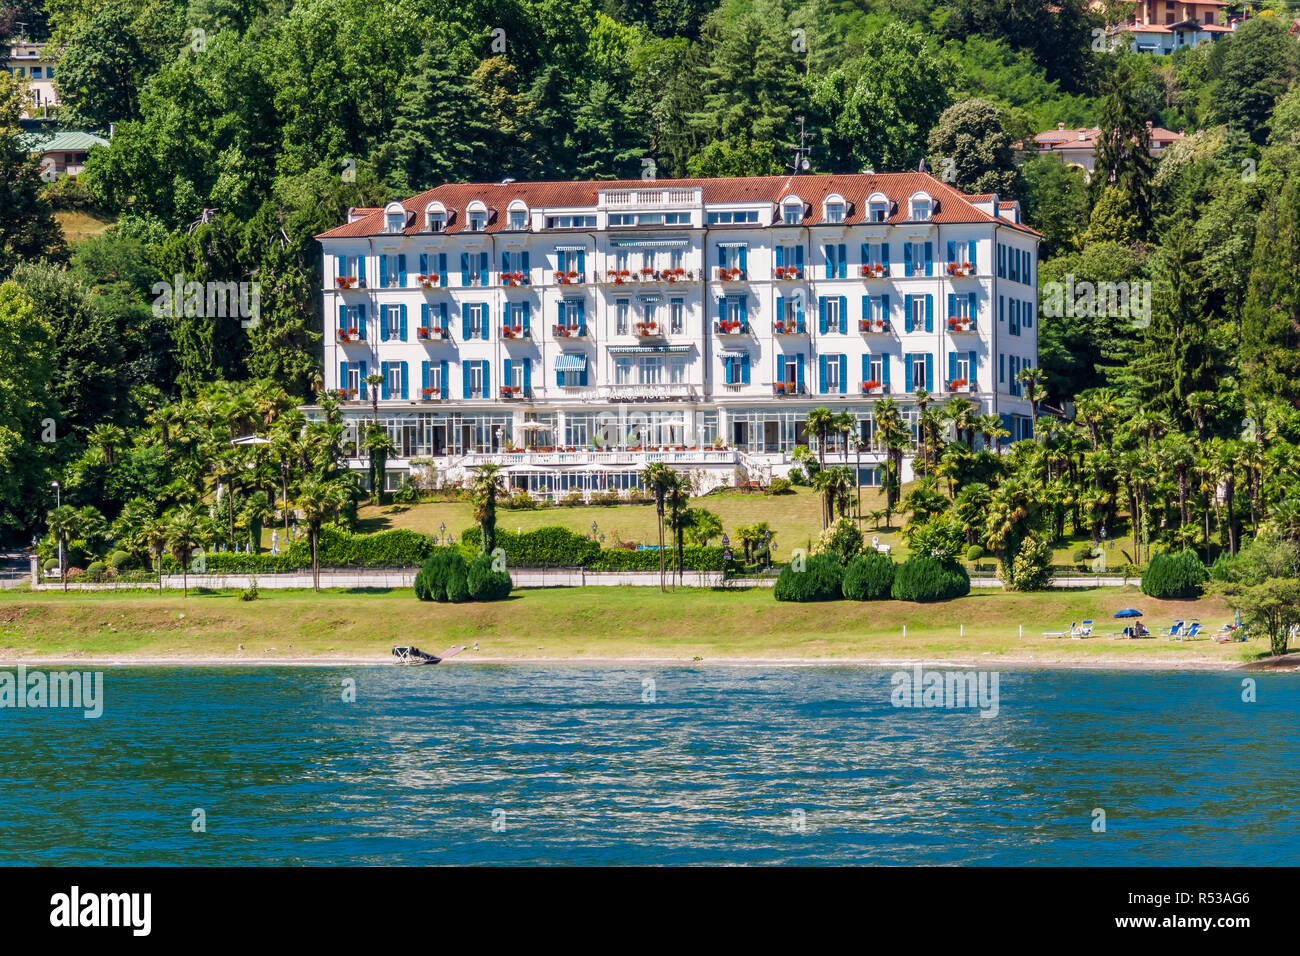 Lido Palace Hotel. This upscale 19th-century hotel overlooking Lake Maggiore and the Borromean Islands is 11 minutes' walk from Baveno ferry terminal. Stock Photo